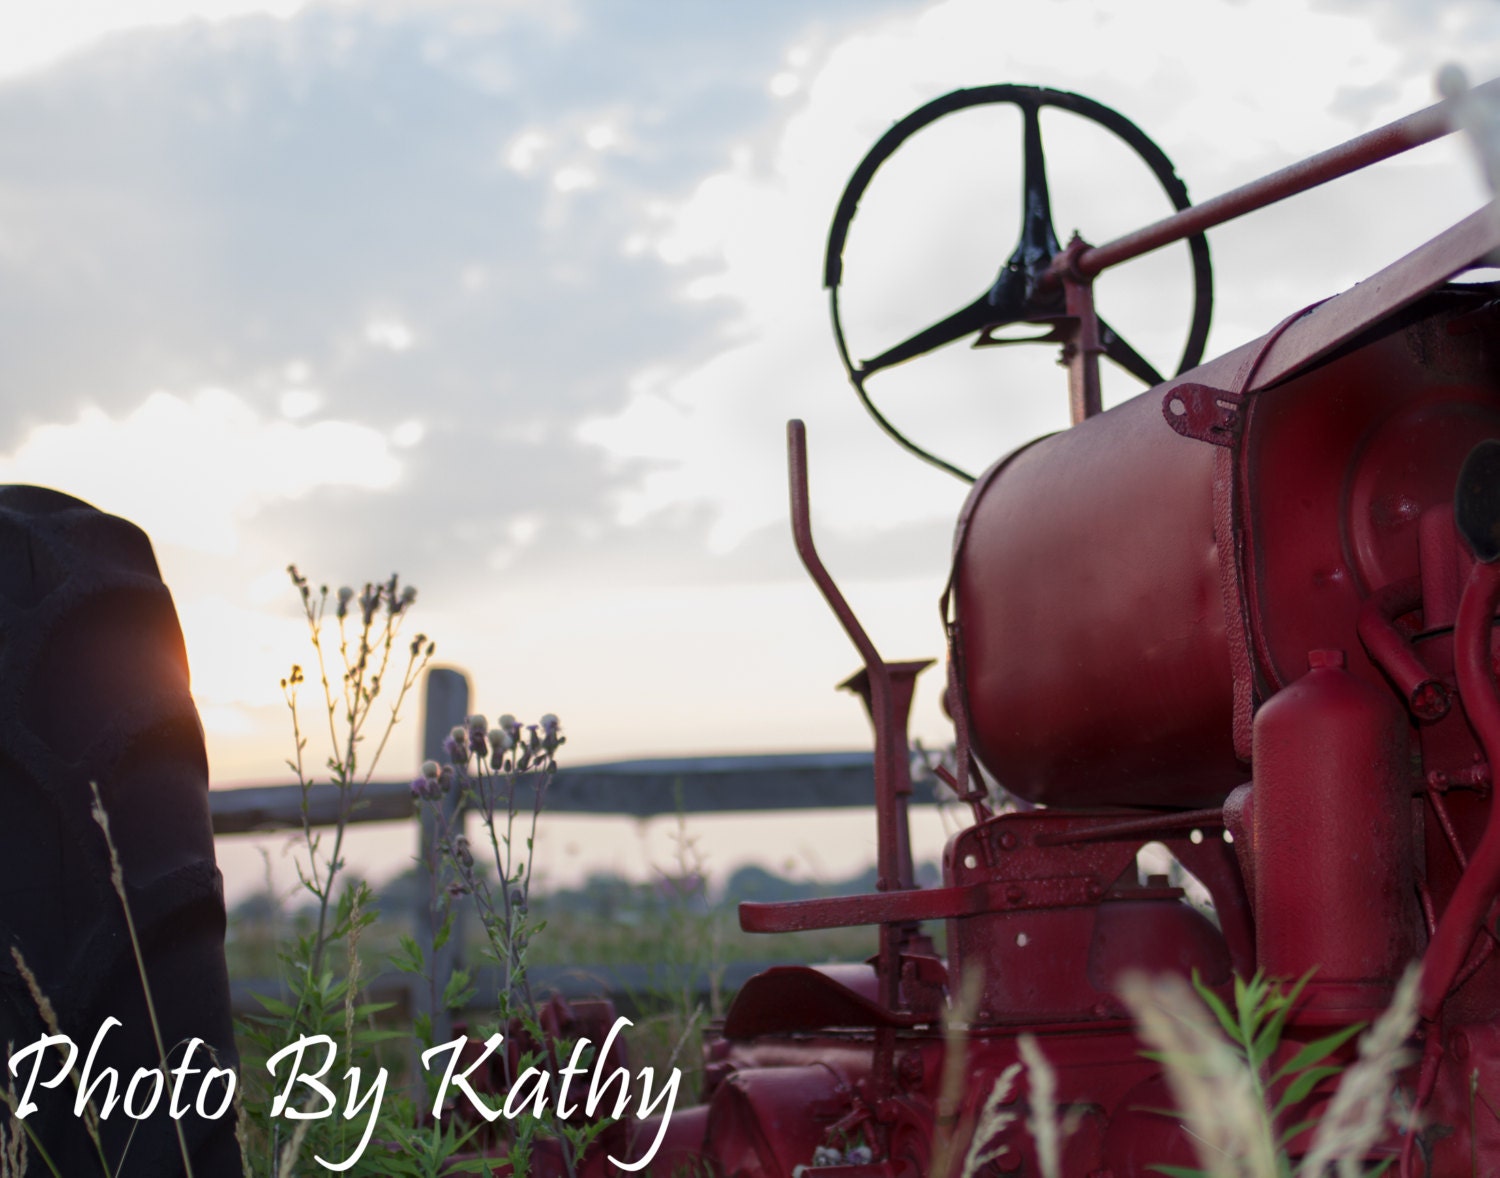 Antique Red Tractor at Sunrise - MakeOneForMeToo